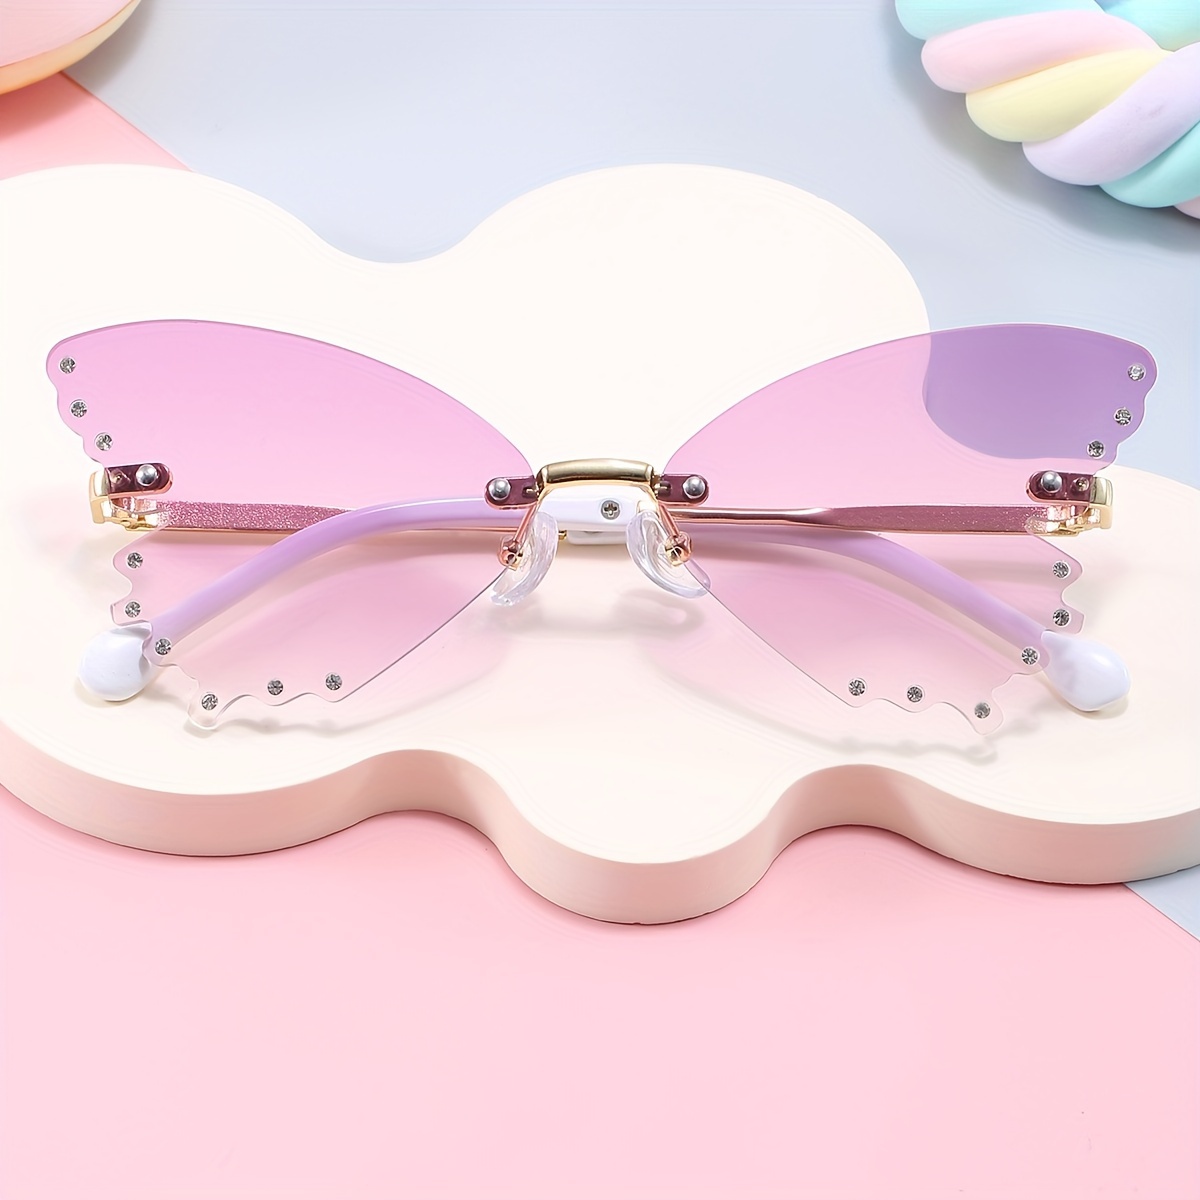 

Elegant Delicate Y2k Purple Butterfly Rimless Fashion Glasses, Rhinestone Edge, For Boys Girls Outdoor Sports Party Vacation Travel Supply Photo Prop